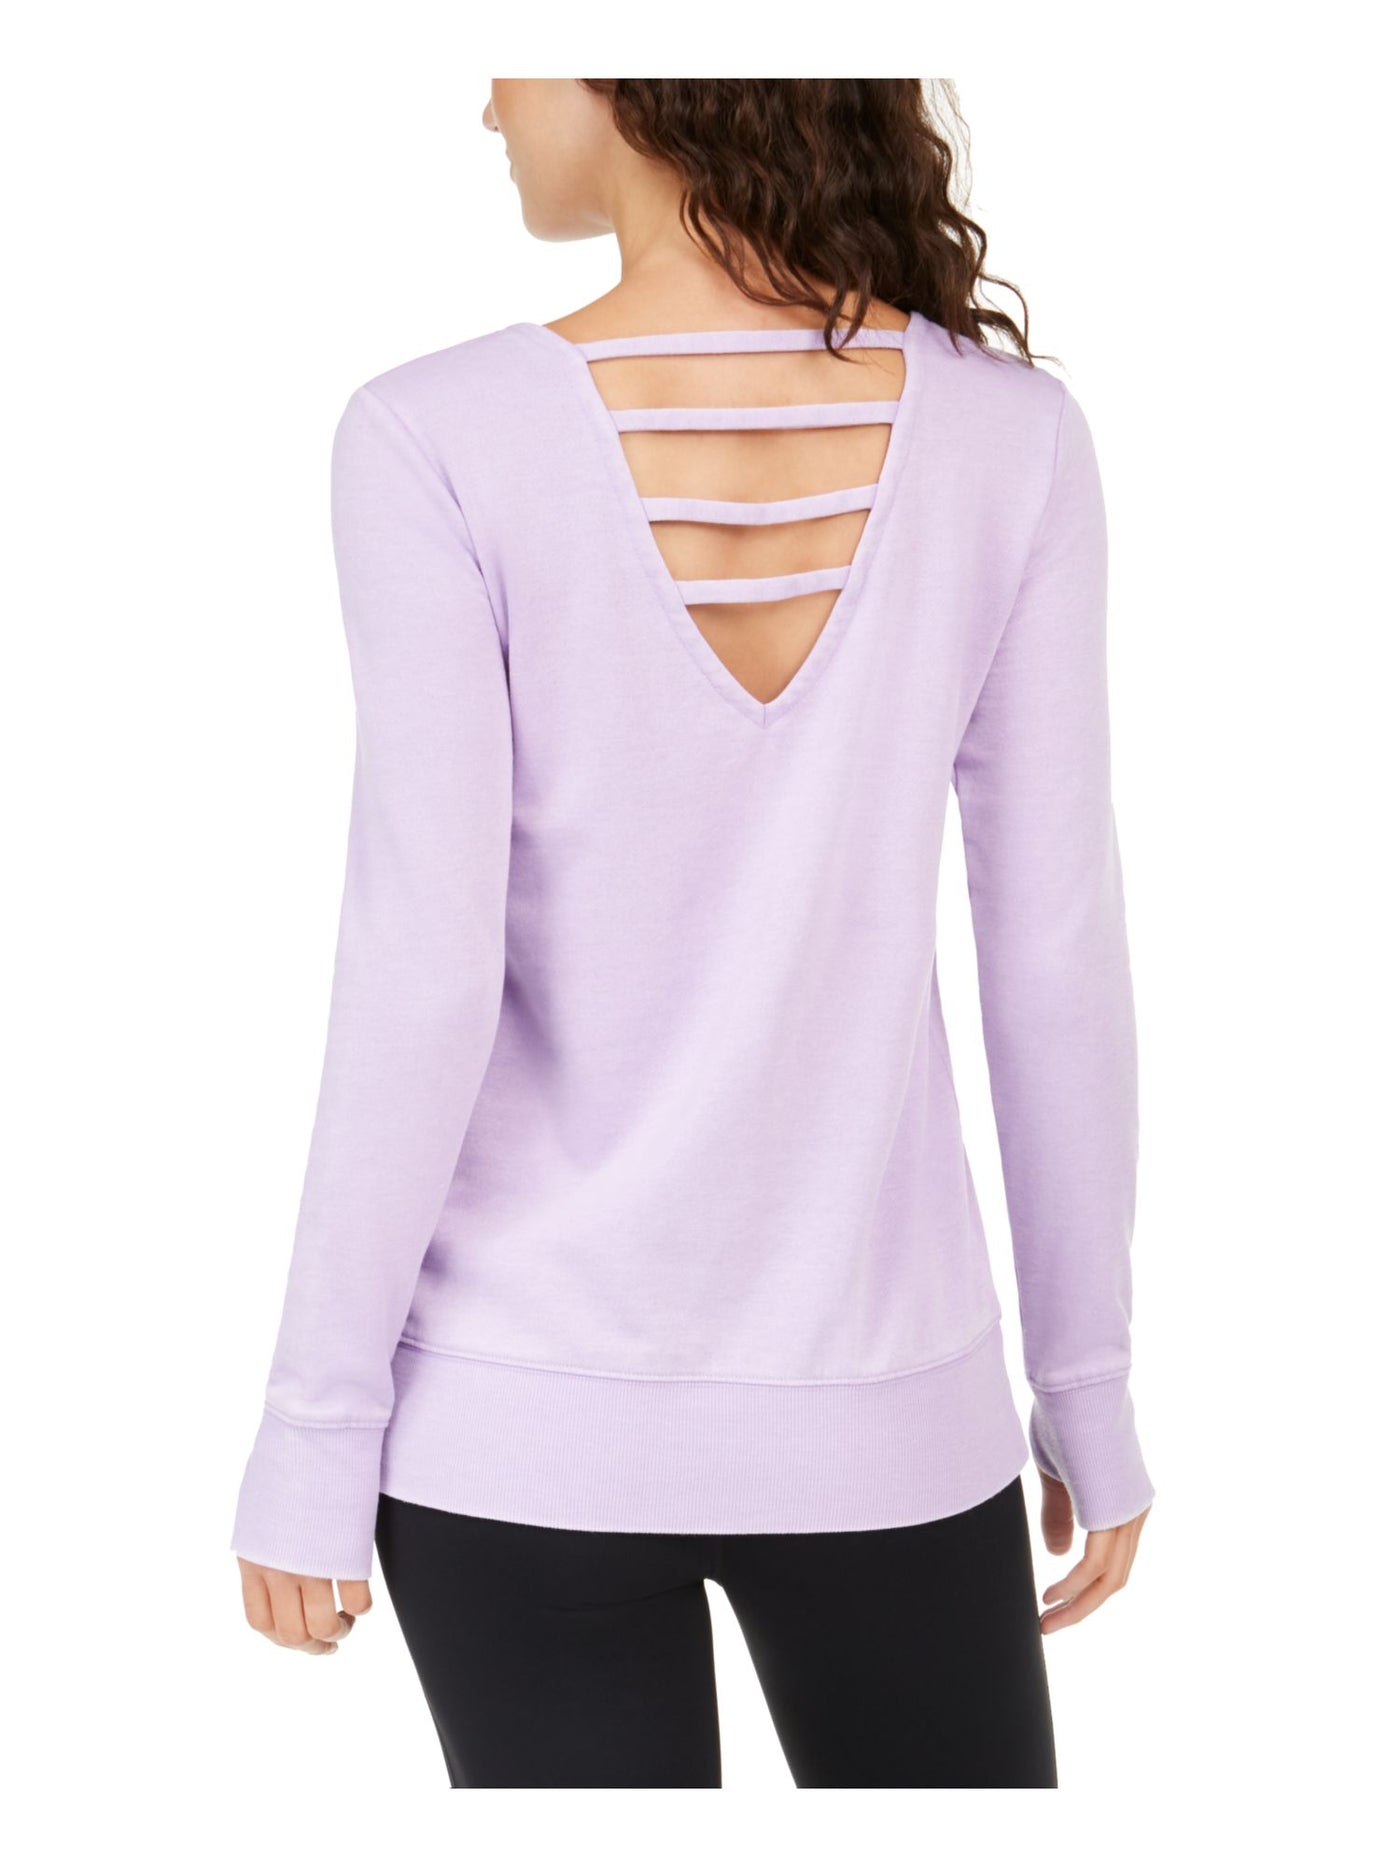 IDEOLOGY Womens Purple Cut Out  Low Back Printed Long Sleeve Jewel Neck Evening Top S